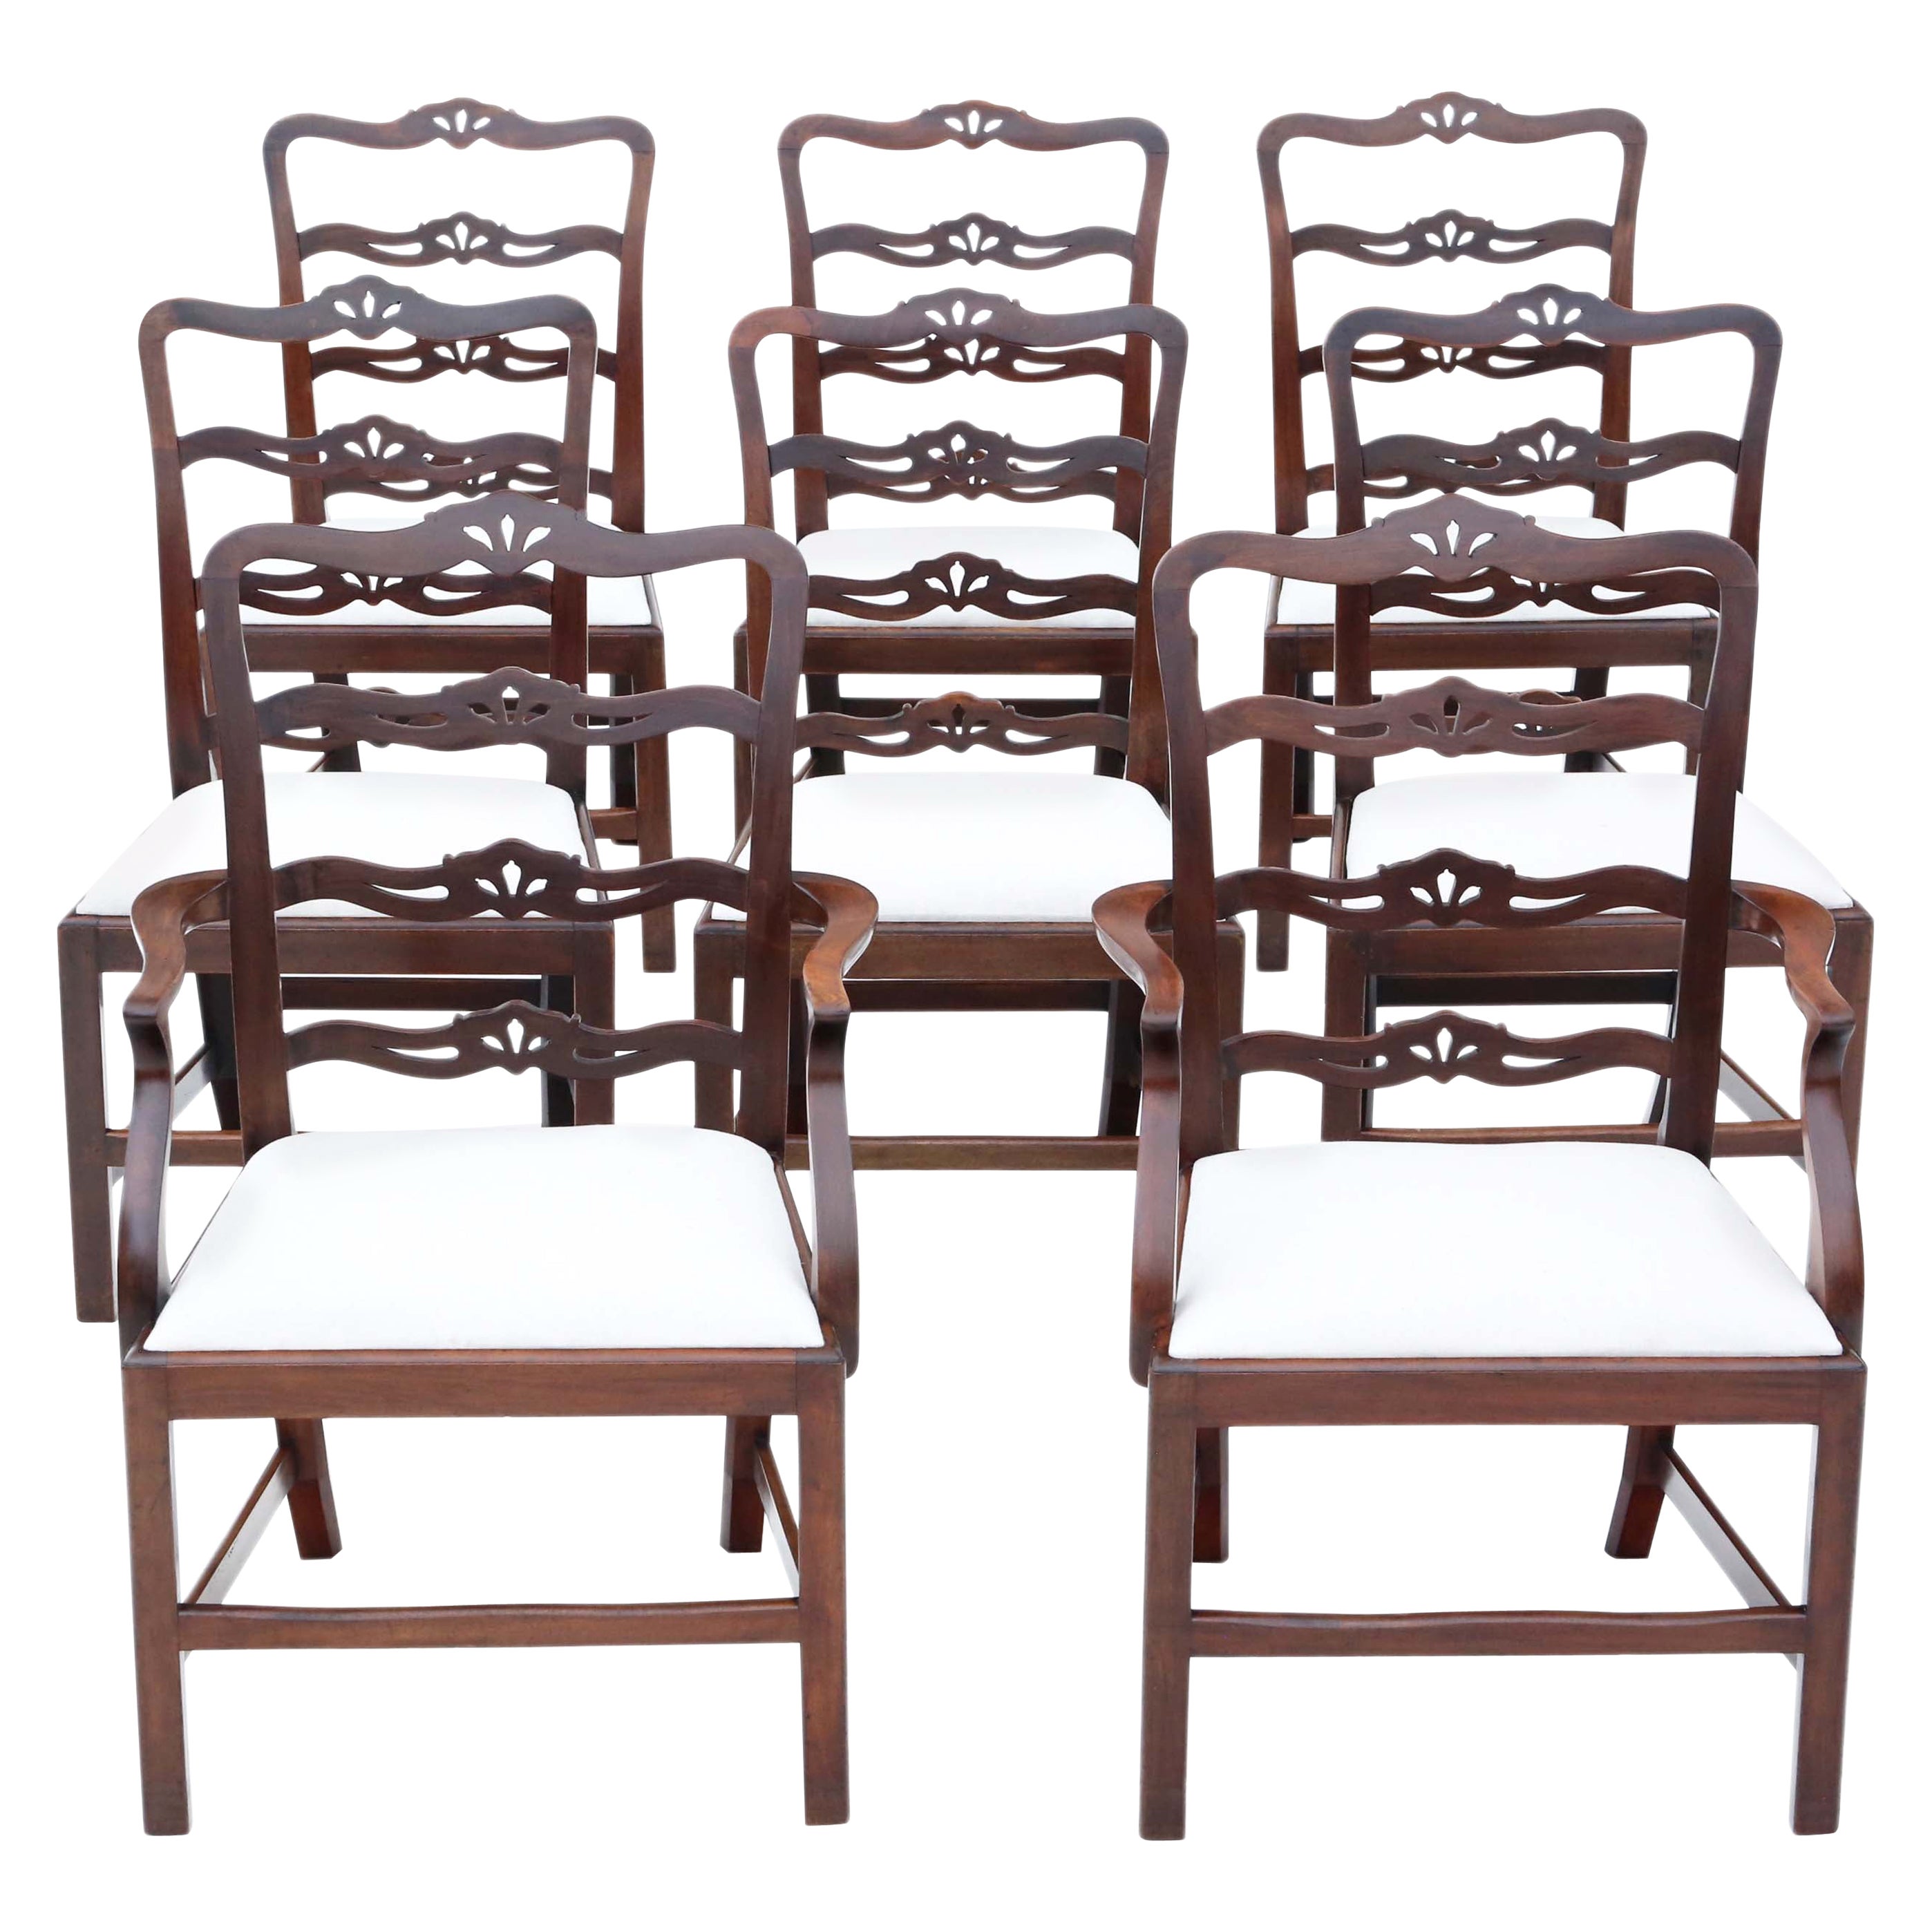 Antique Quality Set of 8 '6 + 2' Mahogany Dining Chairs 19th Century Ribbon Back